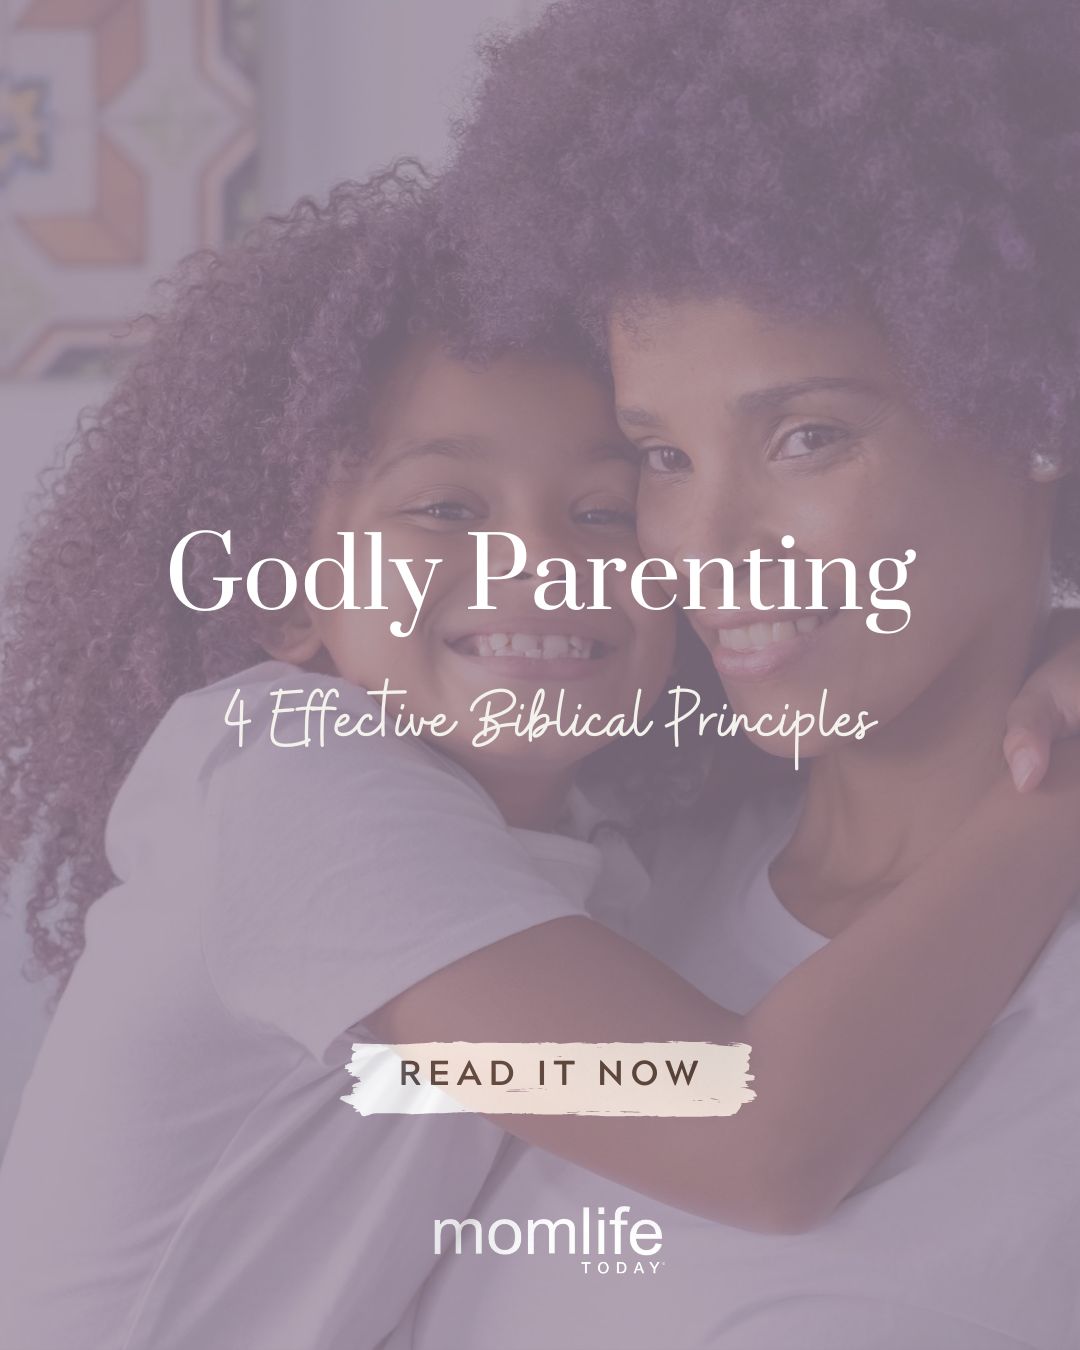 Benefits of godly parenting